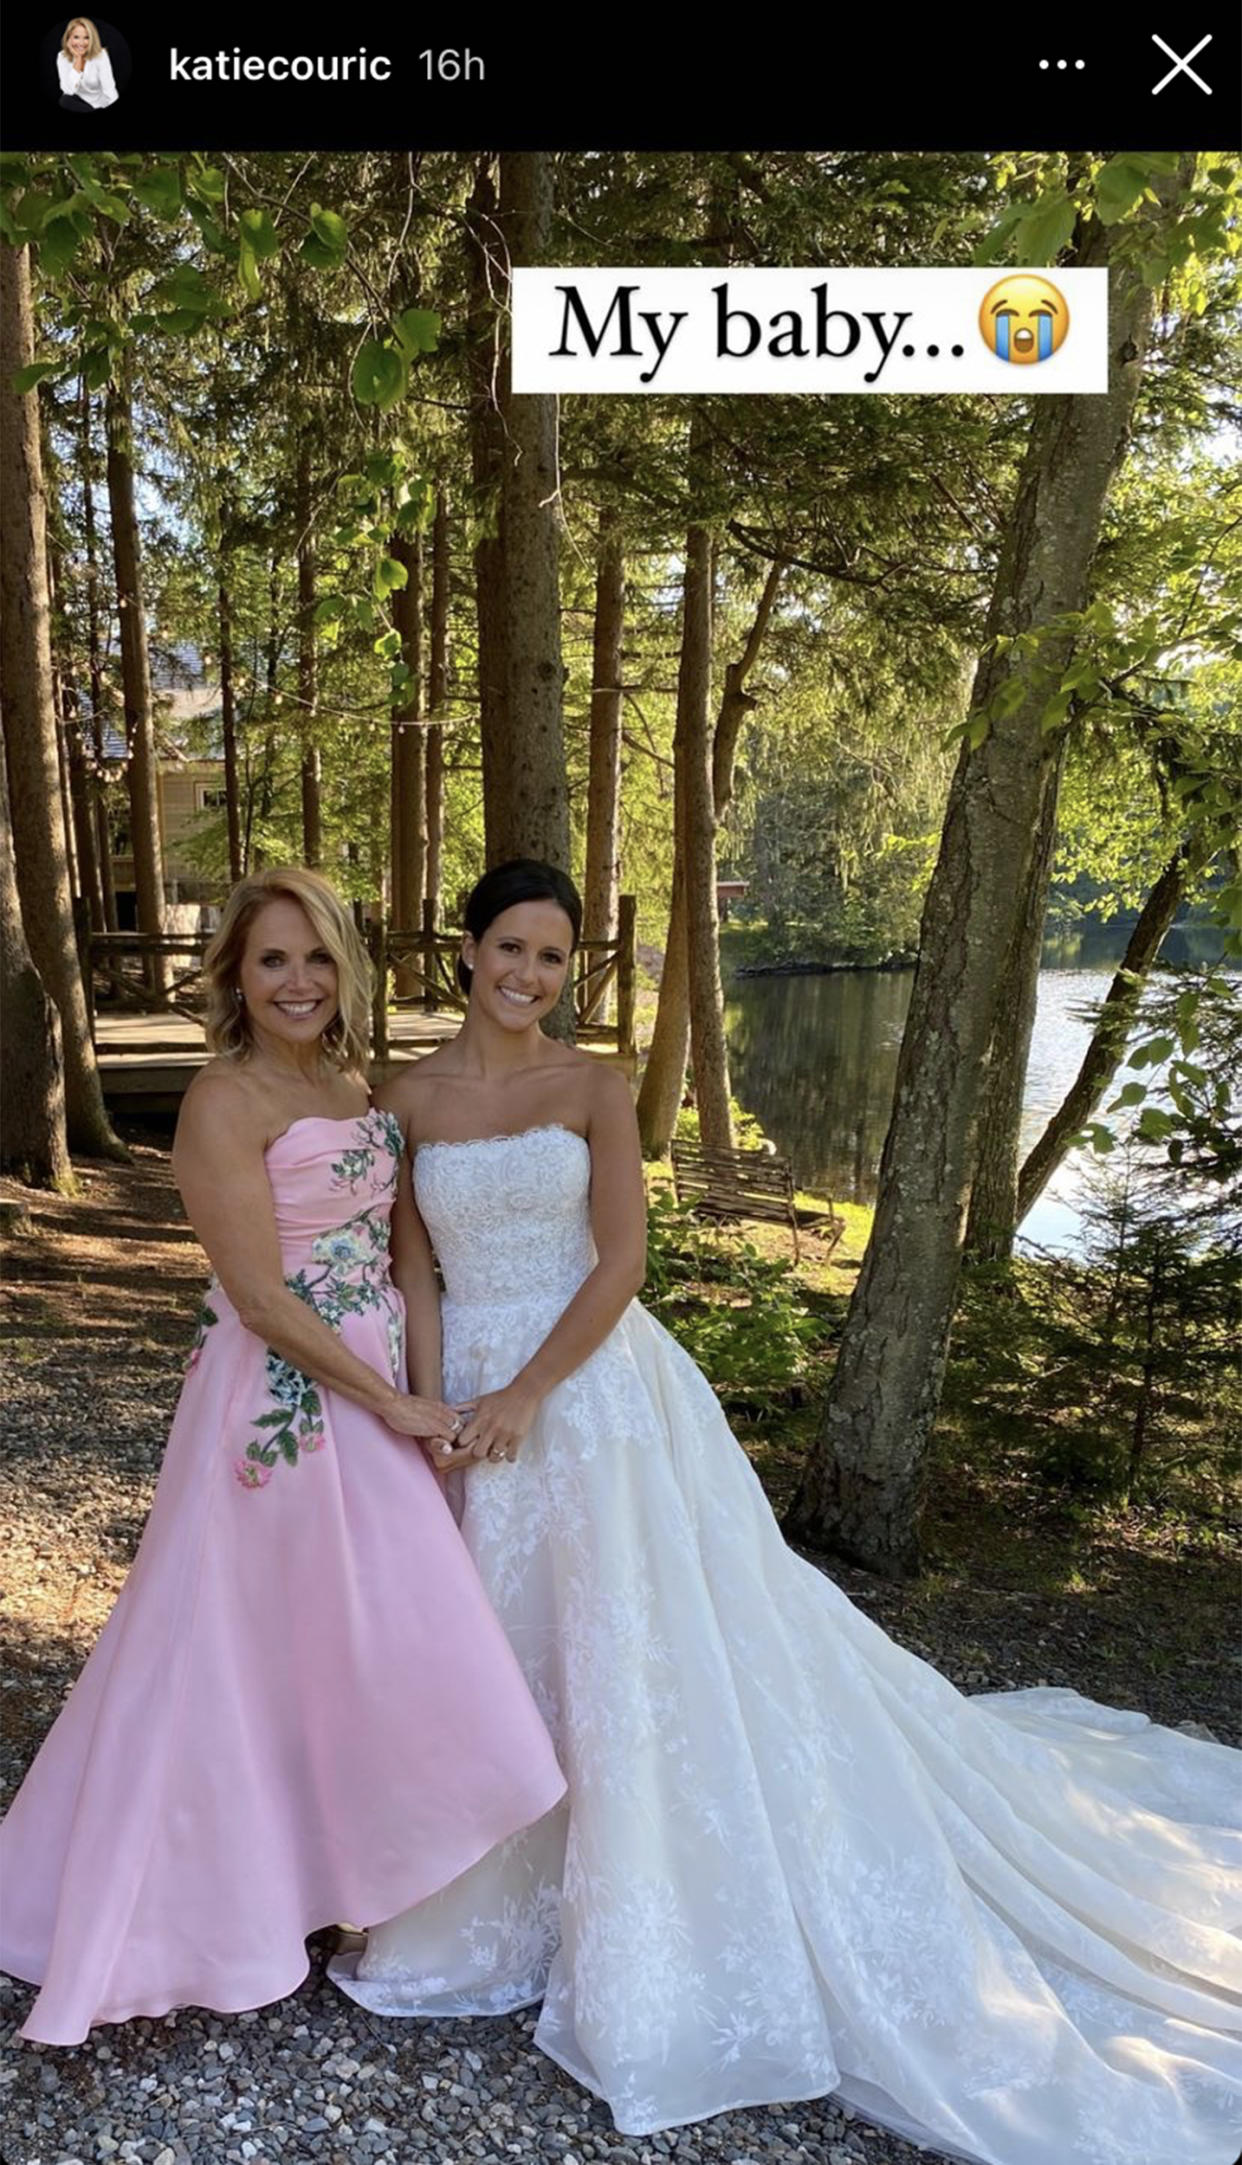 Katie Couric poses alongside daughter Ellie Monahan at Cedar Lakes Estate in Port Jarvis, New York.  (katiecouric / Instagram)